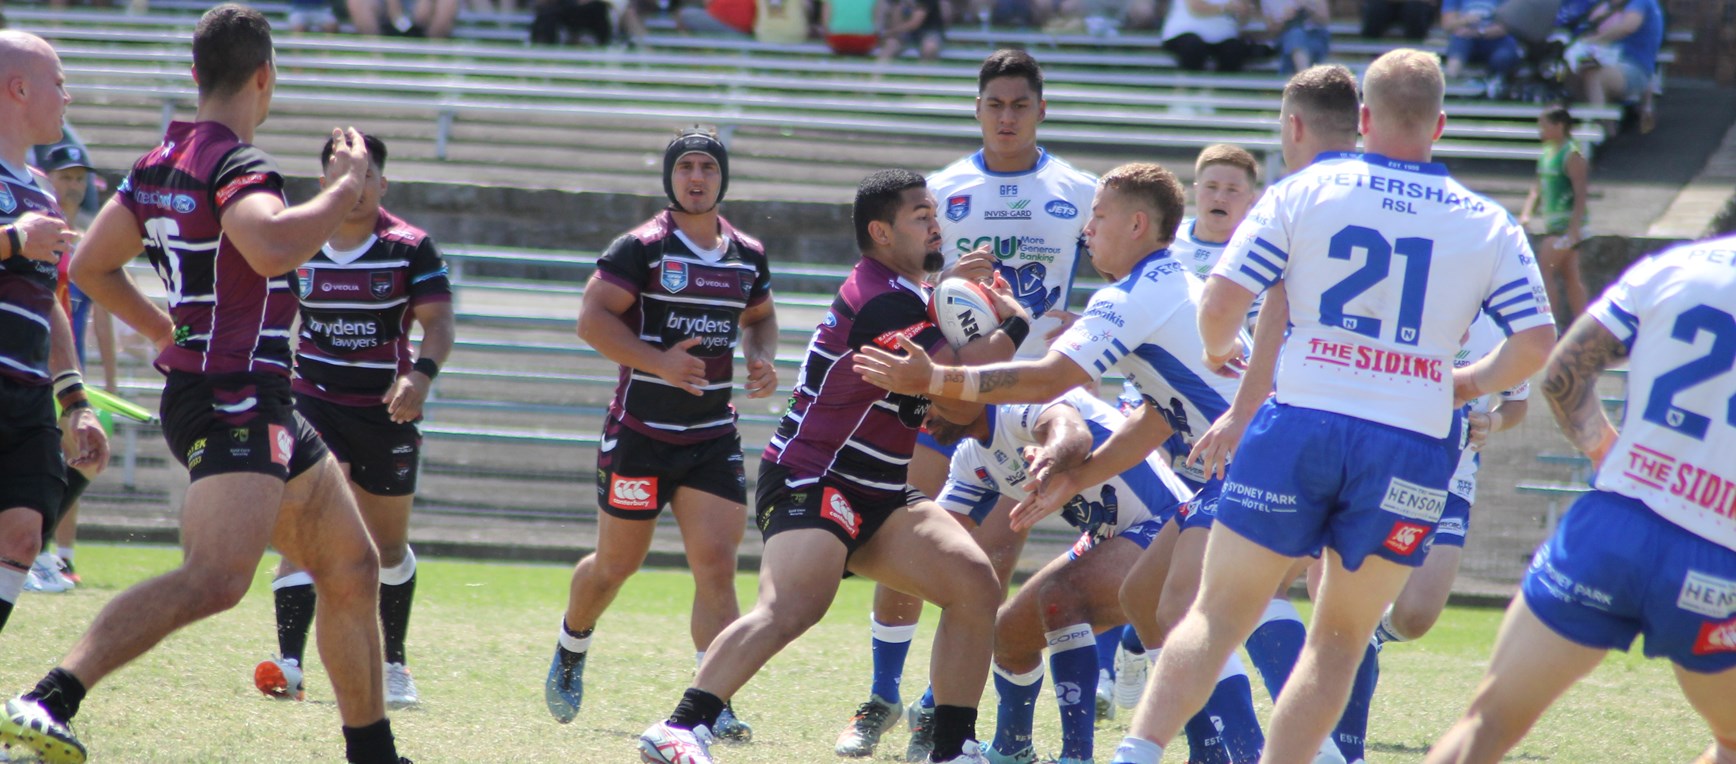 In pics: BWSE trial vs Newtown Jets